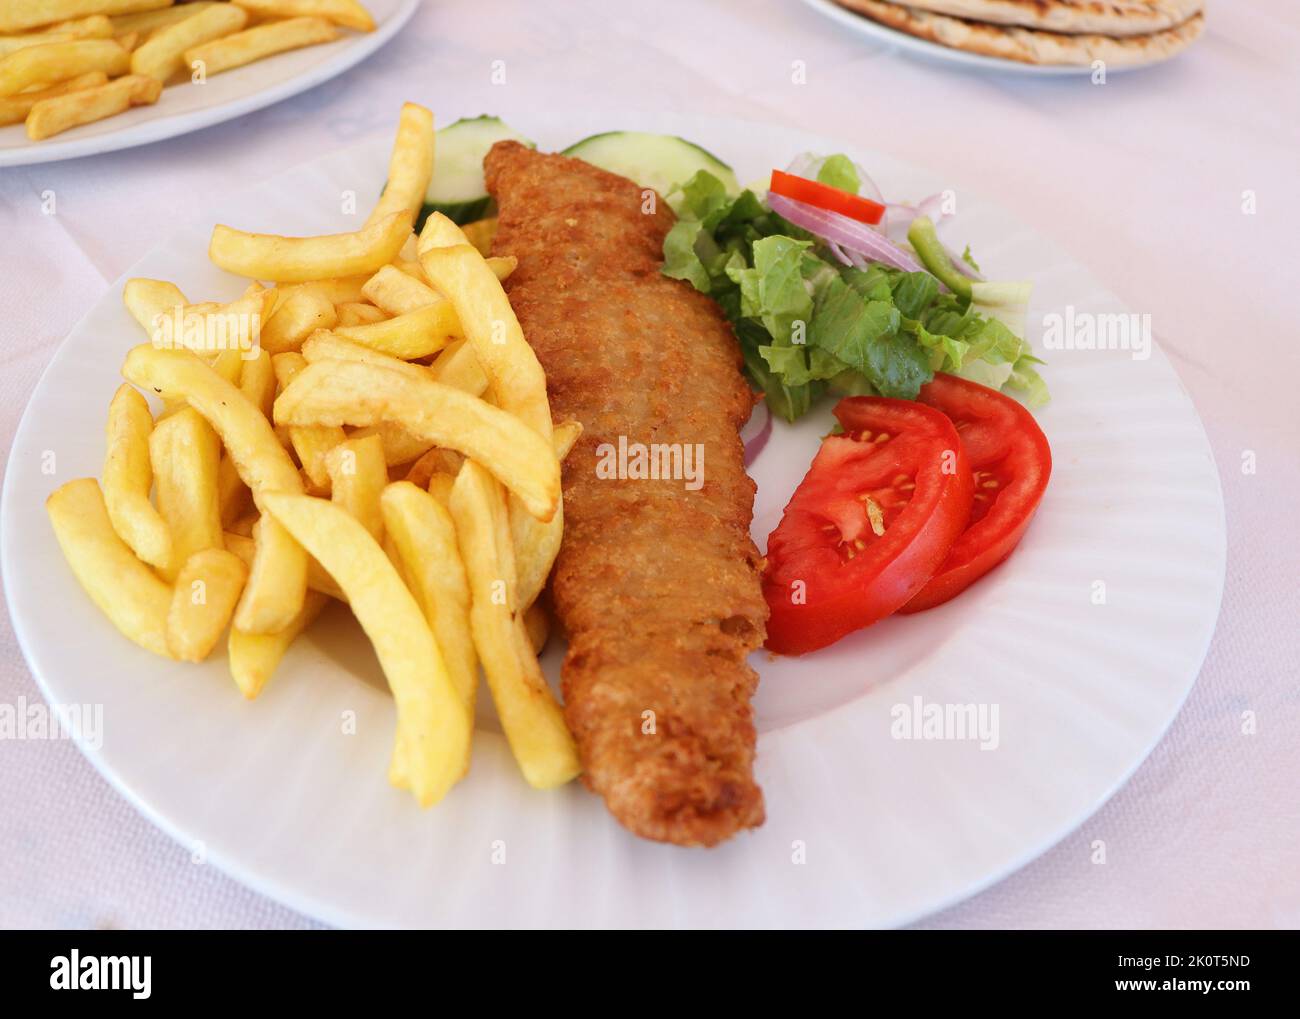 Fish and chips. Deep fried fish filet with french fries served on white plate with vegetables Stock Photo